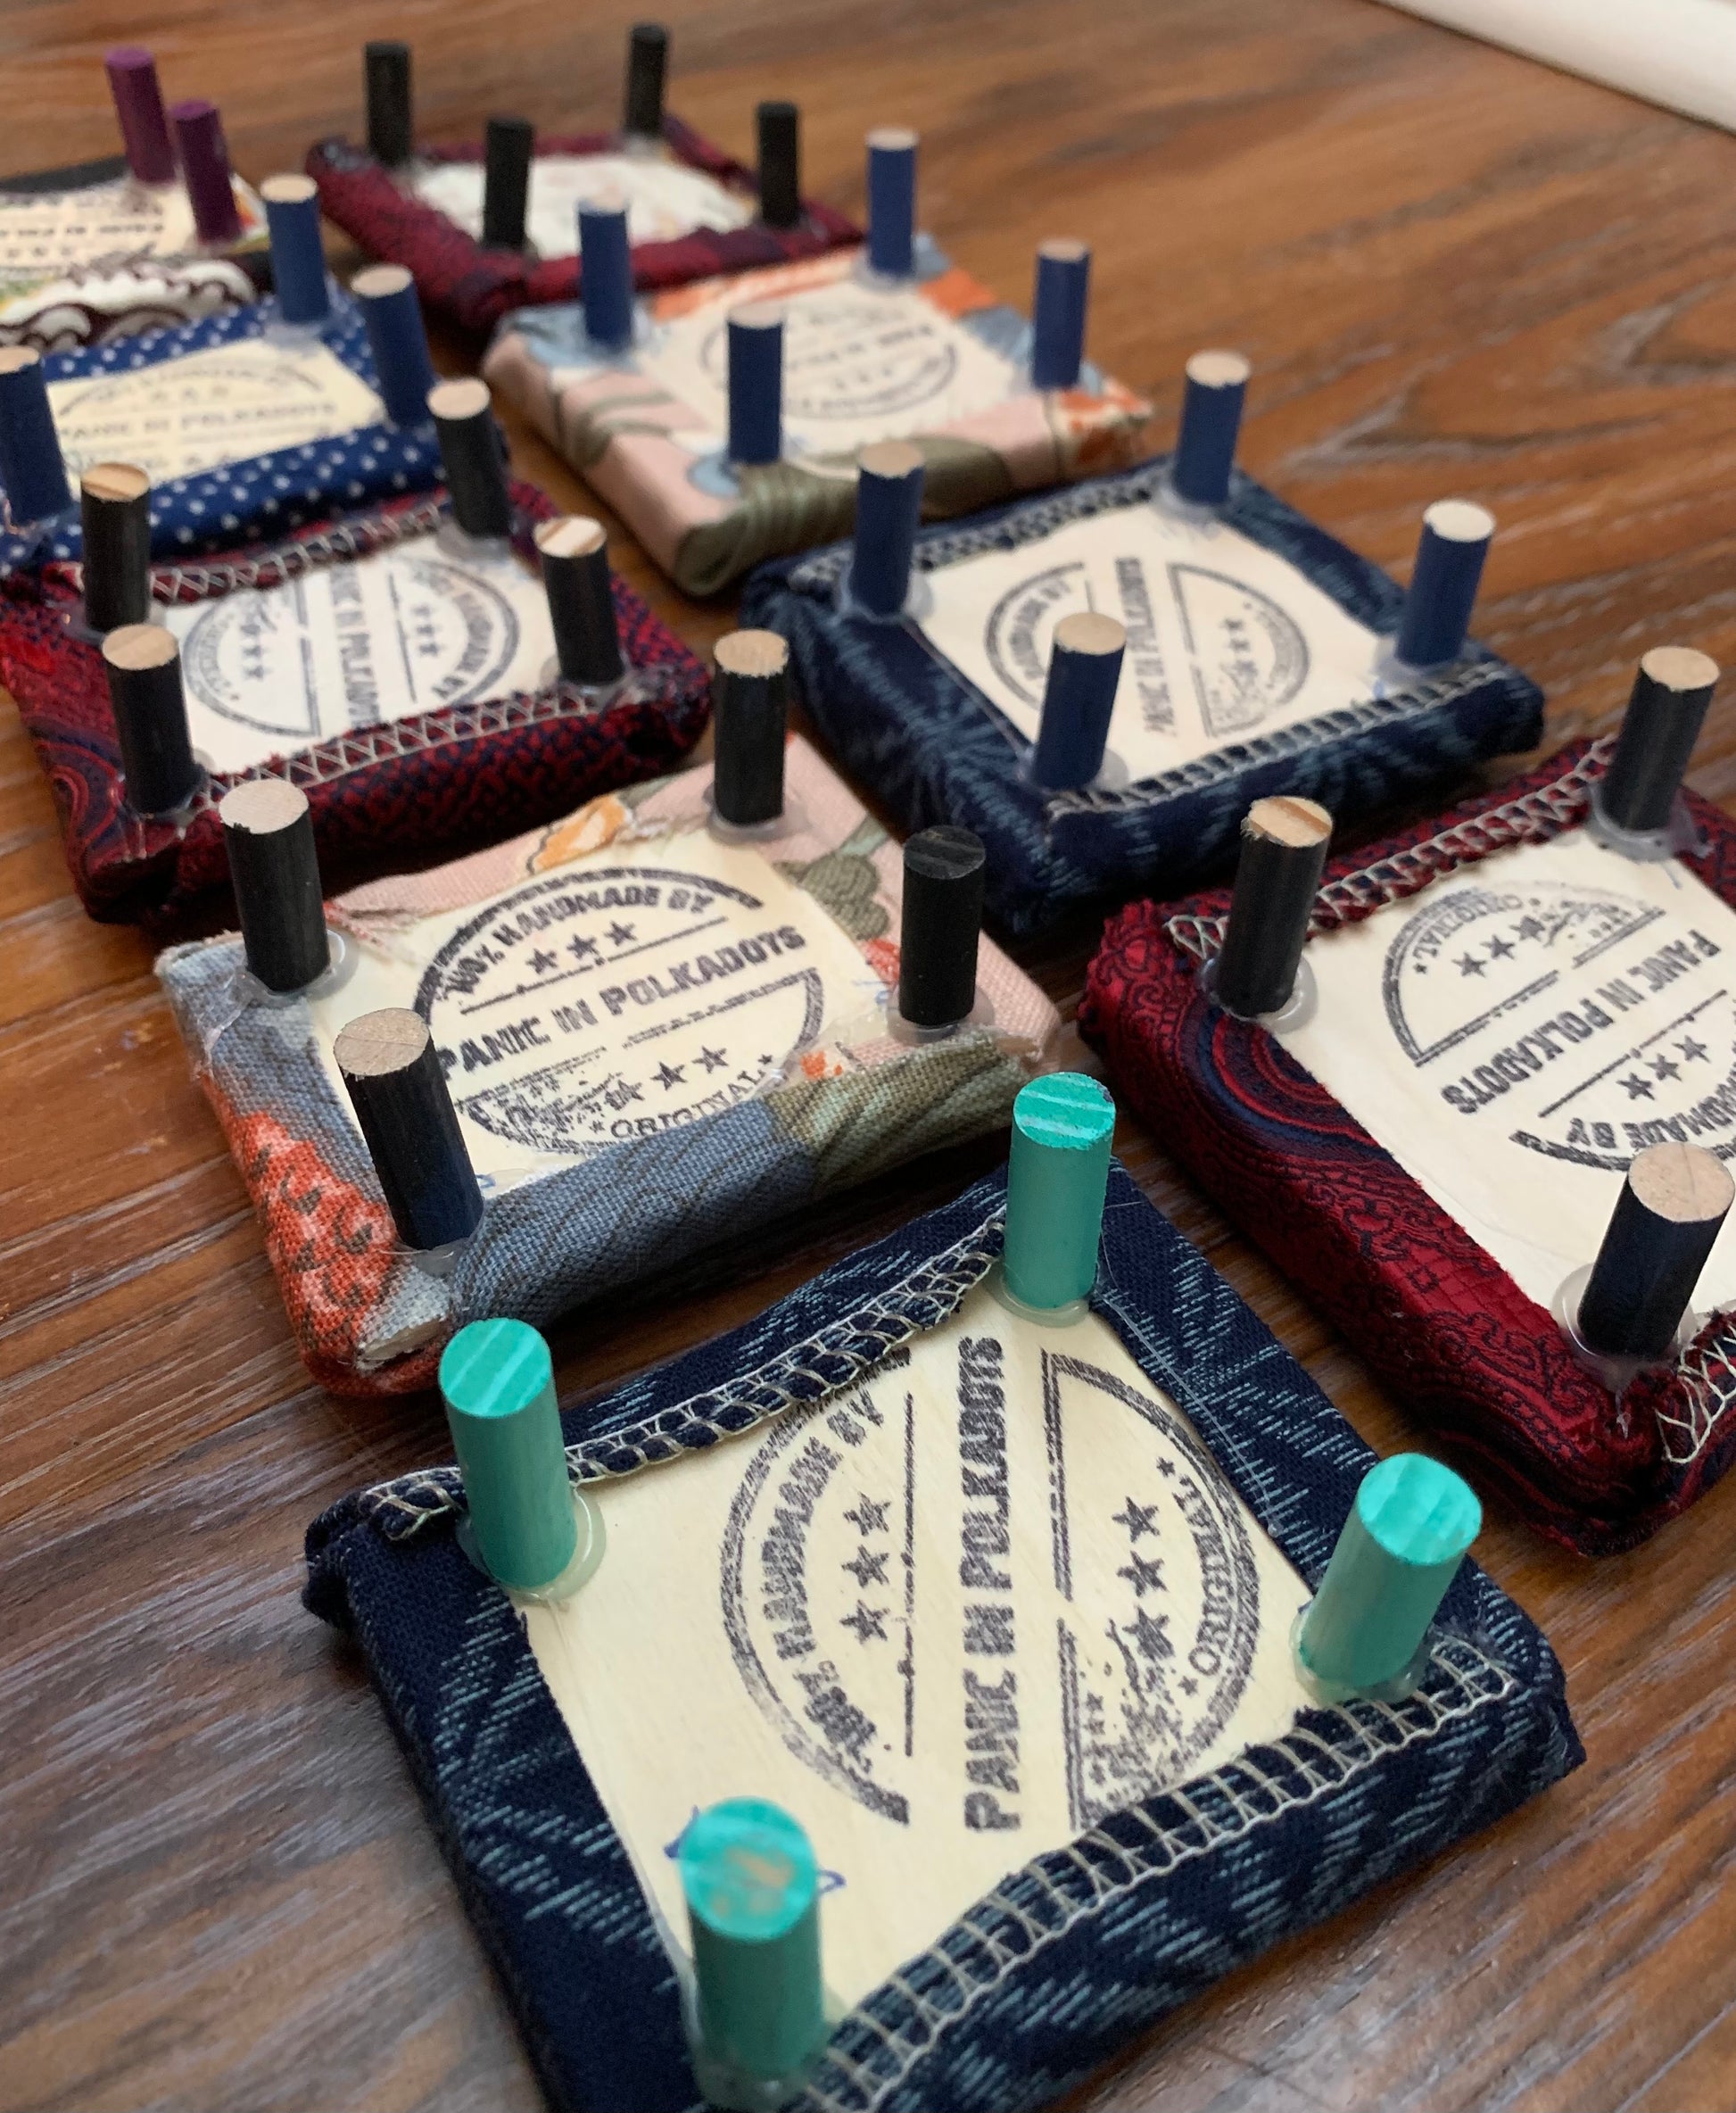 aerial side view of various miniature ottomans, showing the underside where a "100% handmade by Panic in Polkadots" stamp has been added to the wood base